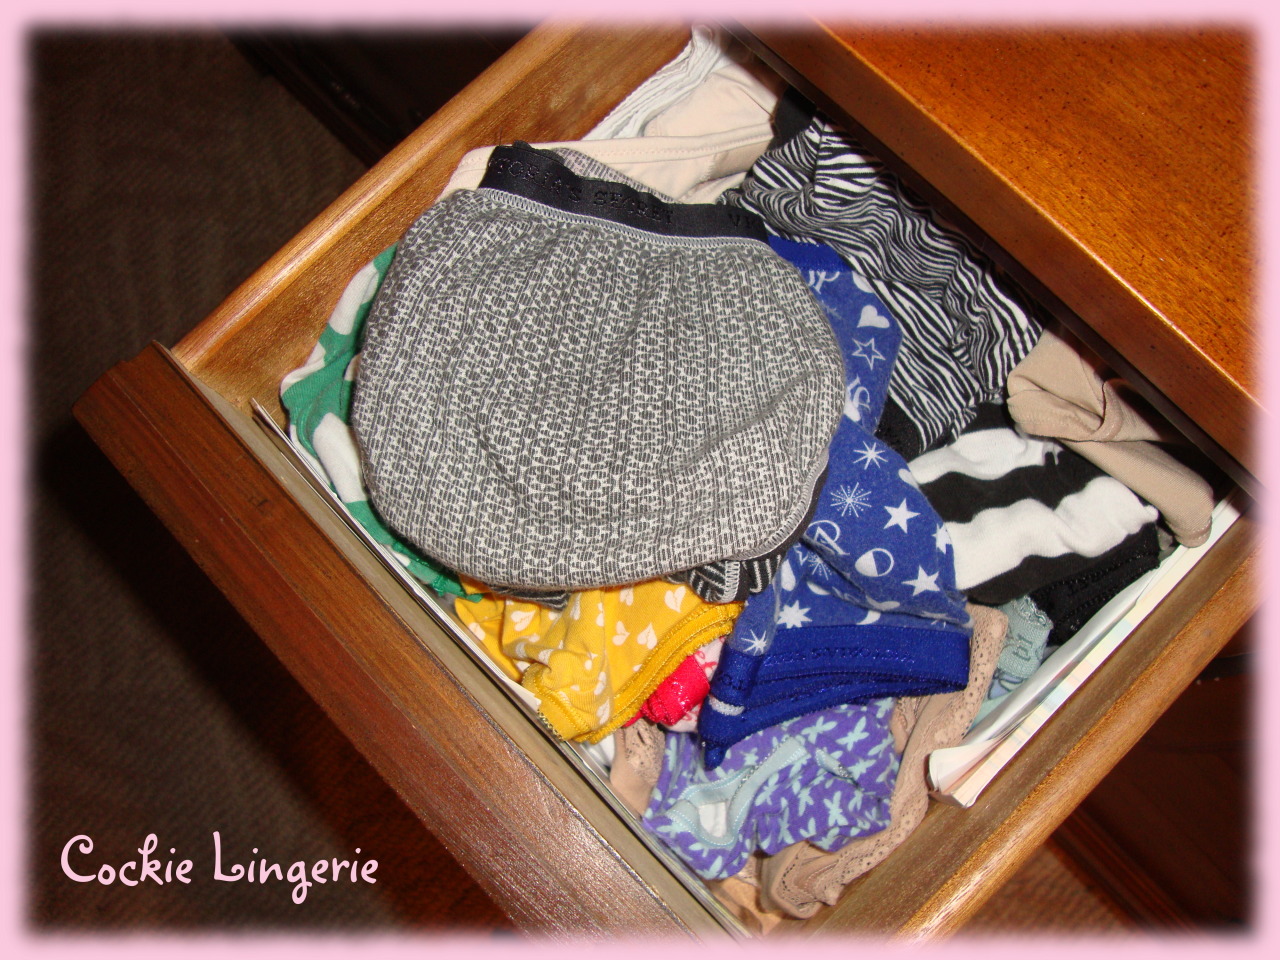 Cocky Lingerie’s ~ Pantie Drawer ParadeYou know you like to peek in those wonderful